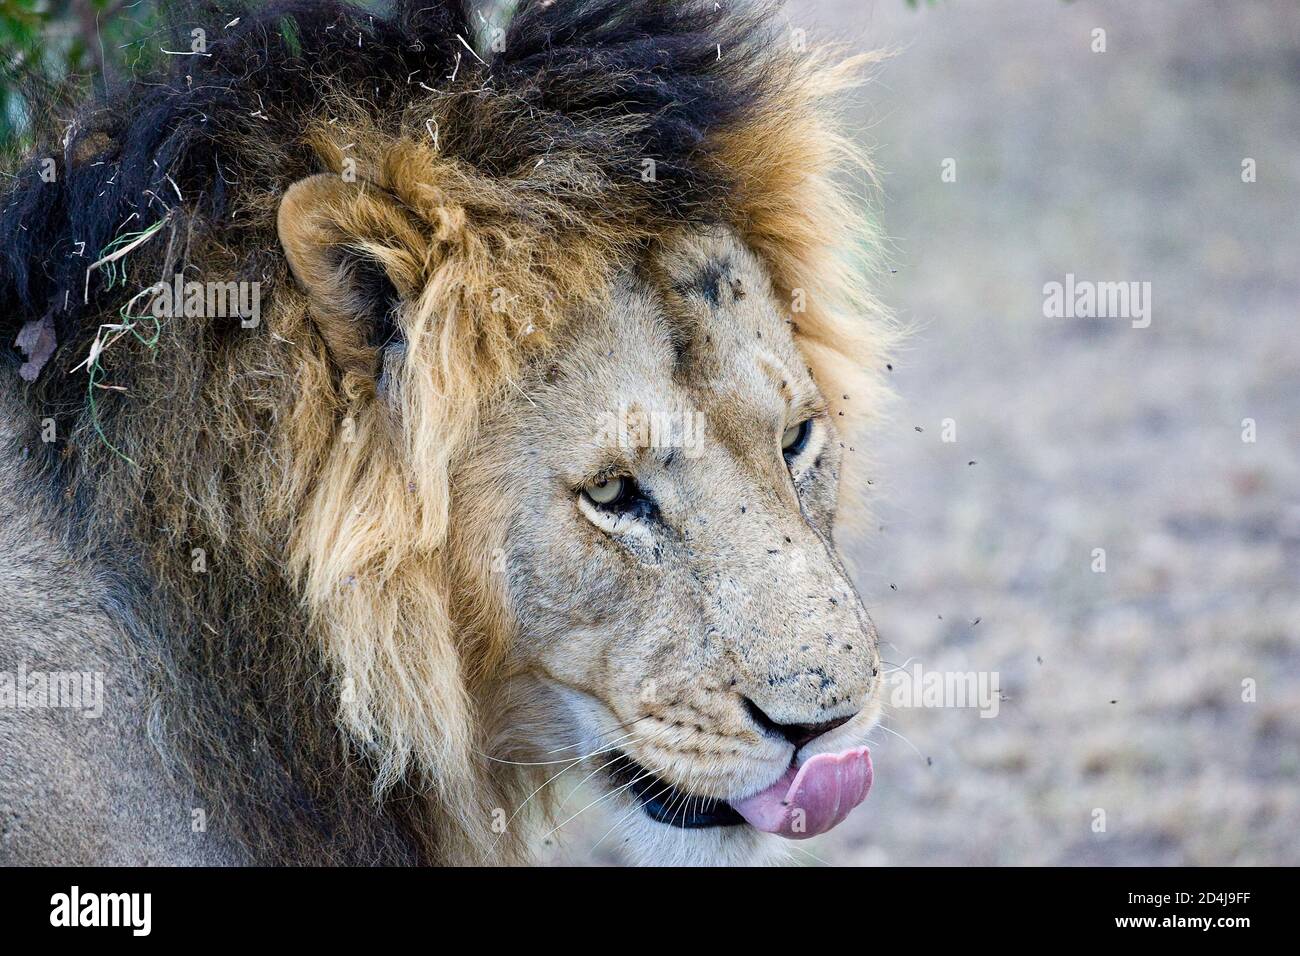 A male lion with bits of grass in its mane licks its nose and lips as a swarm of flies buzzes around its face in the Masai Mara of Kenya Stock Photo